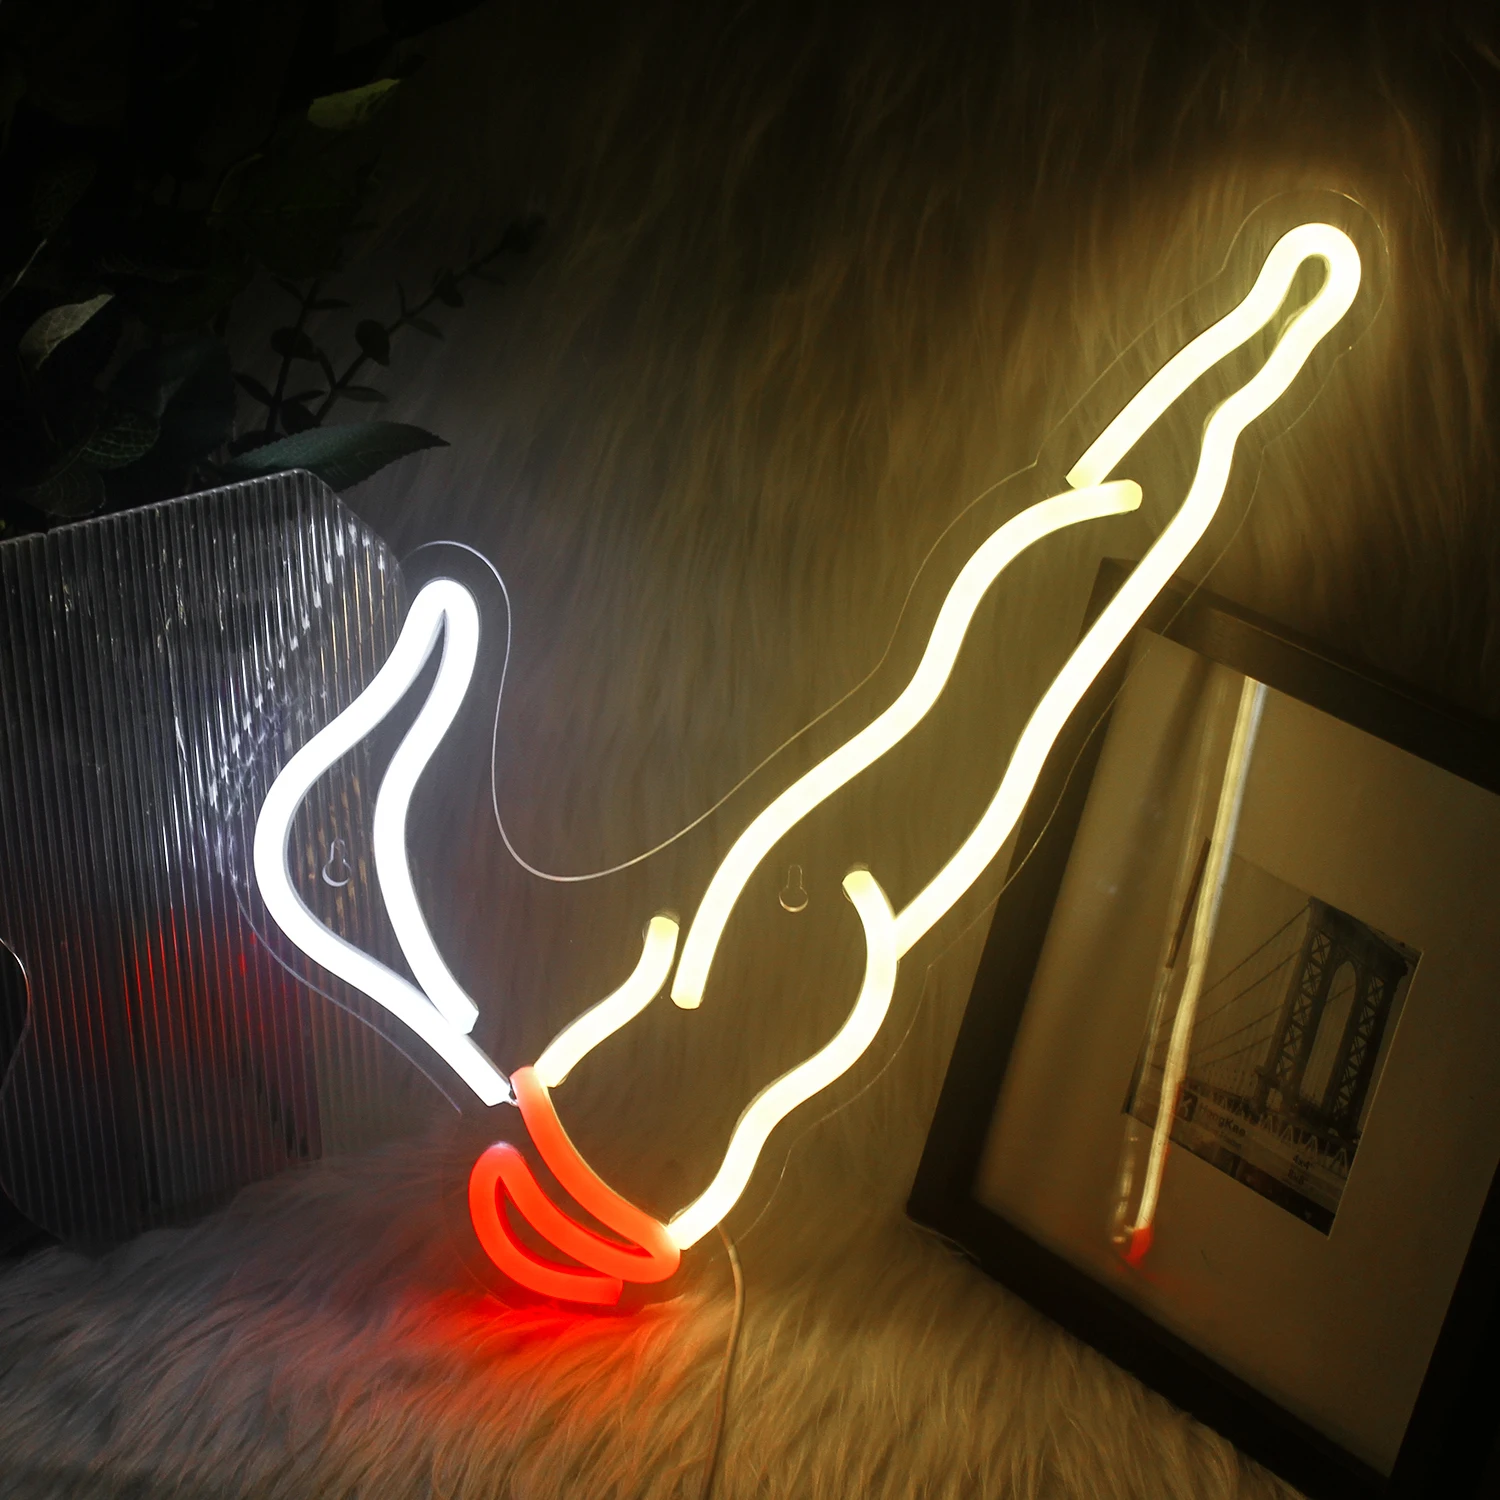 

Ineonlife Smoking Neon Sige LED Cool Light for Festive Party Room Bar Bedroom Club Restaurant Personality Wall Decoration Gift